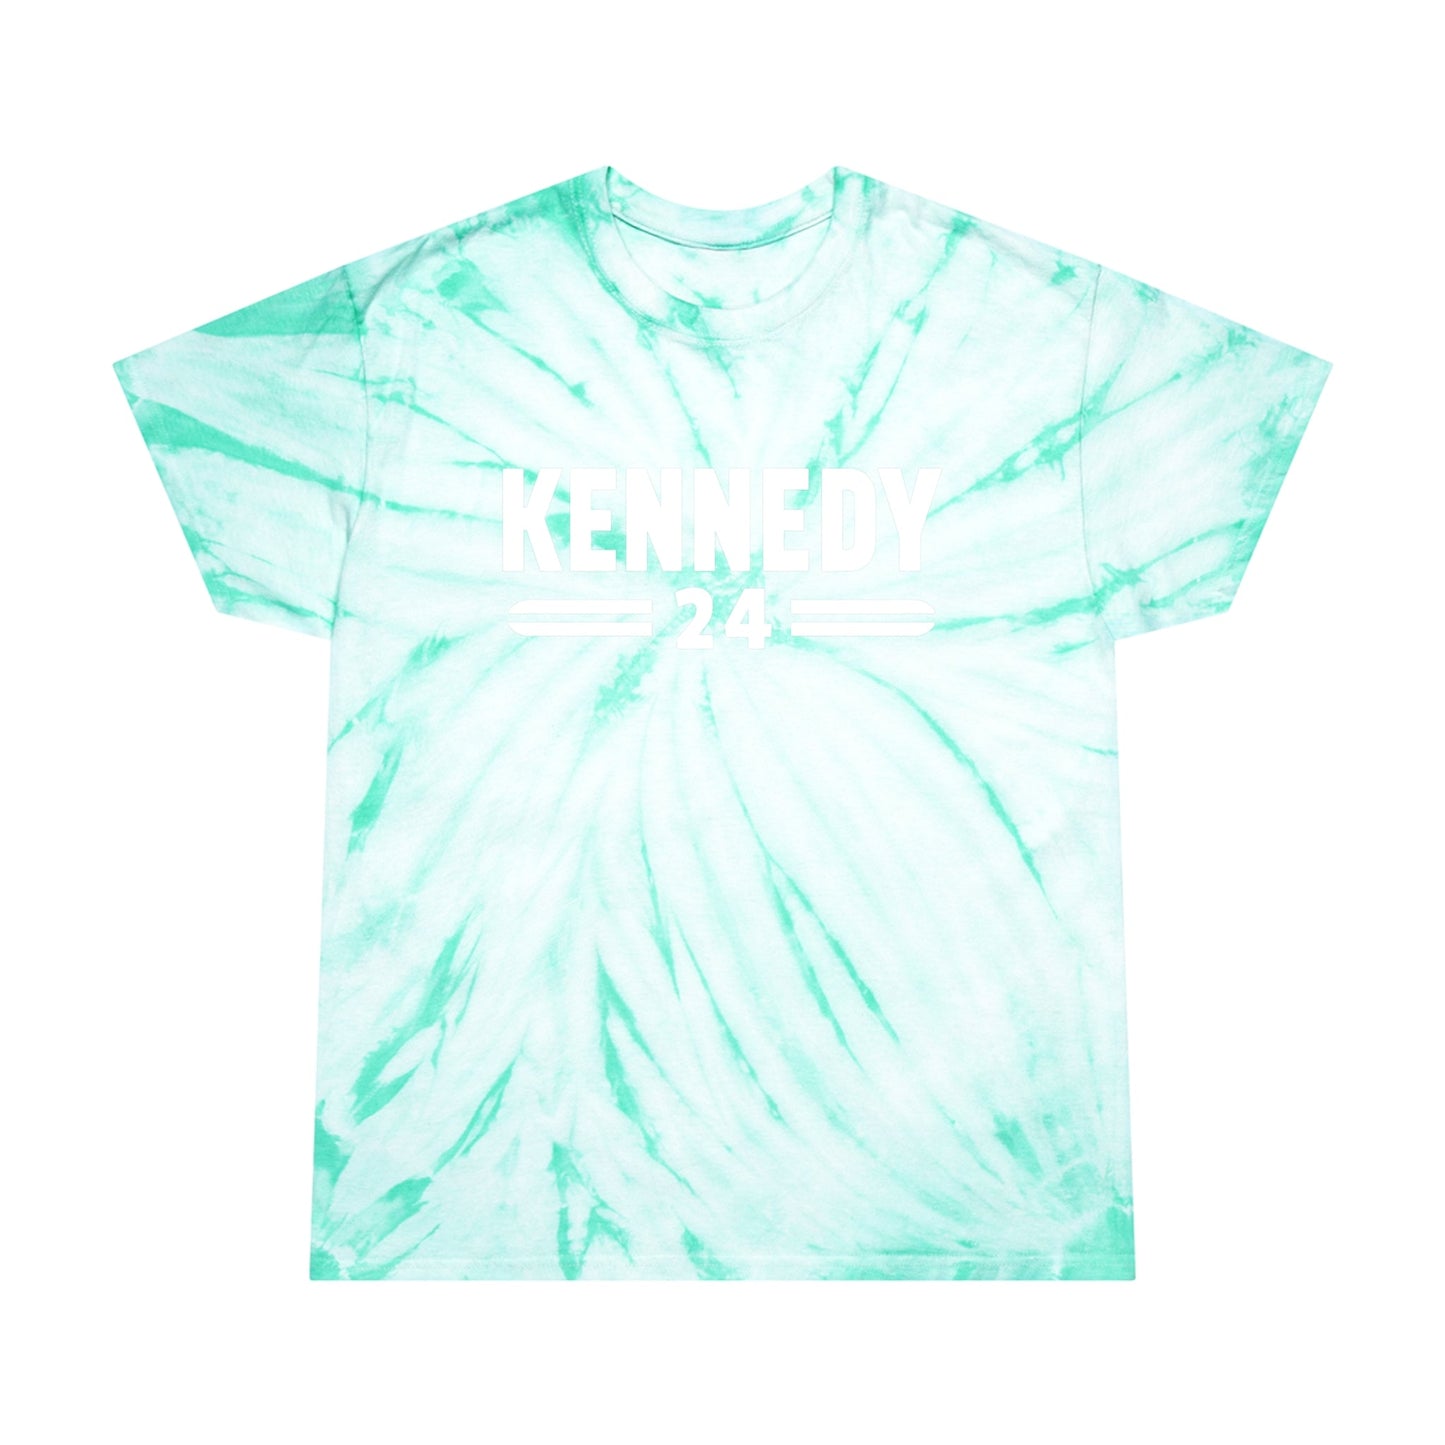 Kennedy Classic Tie - Dye Tee - TEAM KENNEDY. All rights reserved